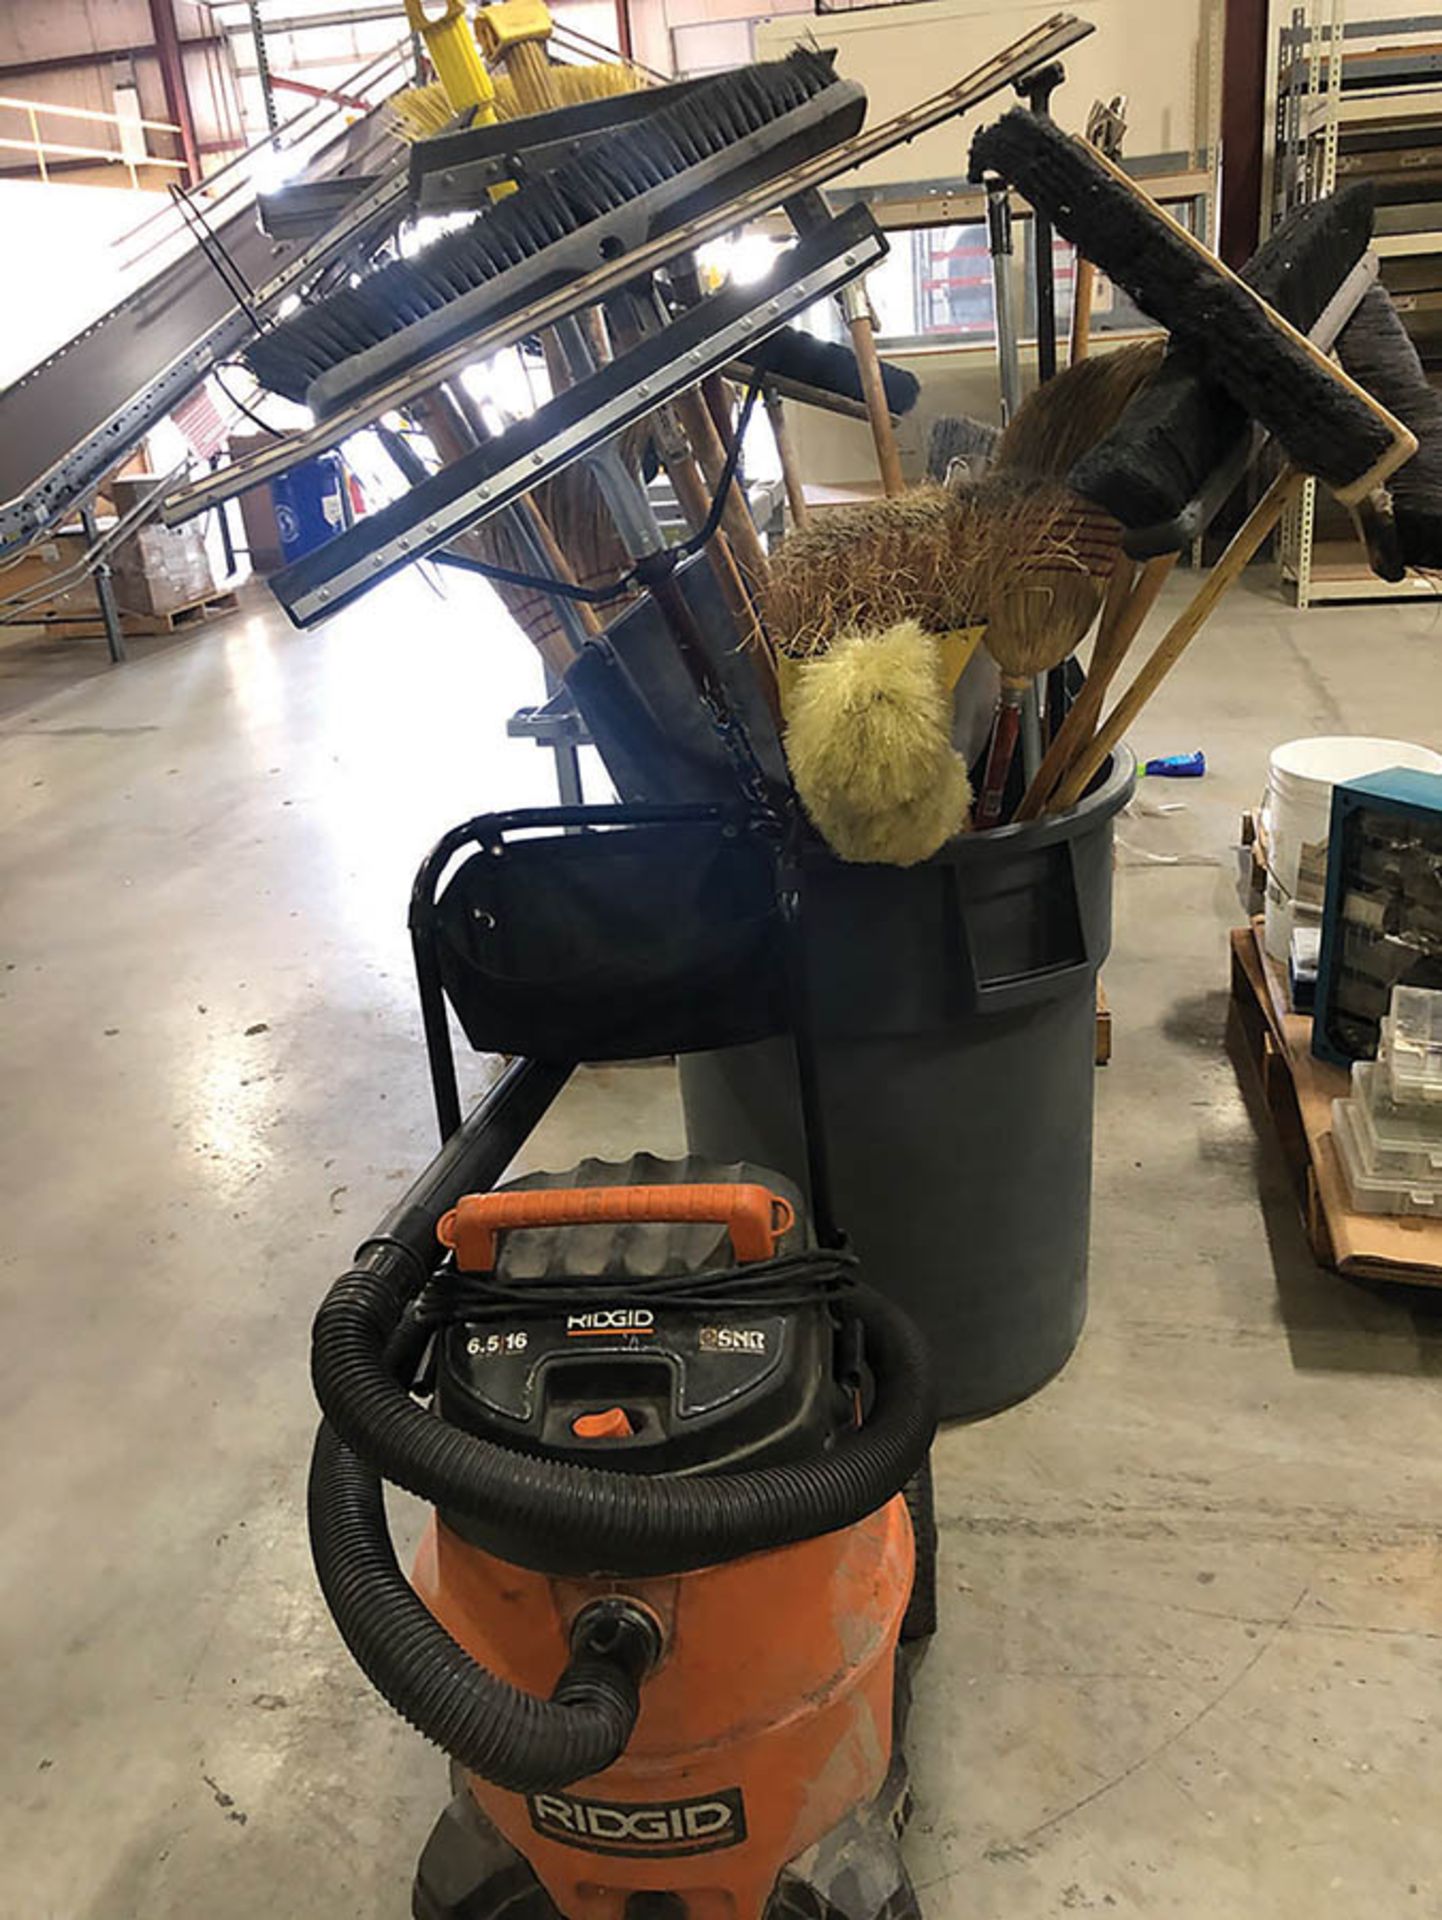 RIDGID 16-GALLON SHOP VAC 6.5 HP, AND GARBAGE CAN WITH BROOMS, GUEST PANS, SQUEEGEES - Image 3 of 3